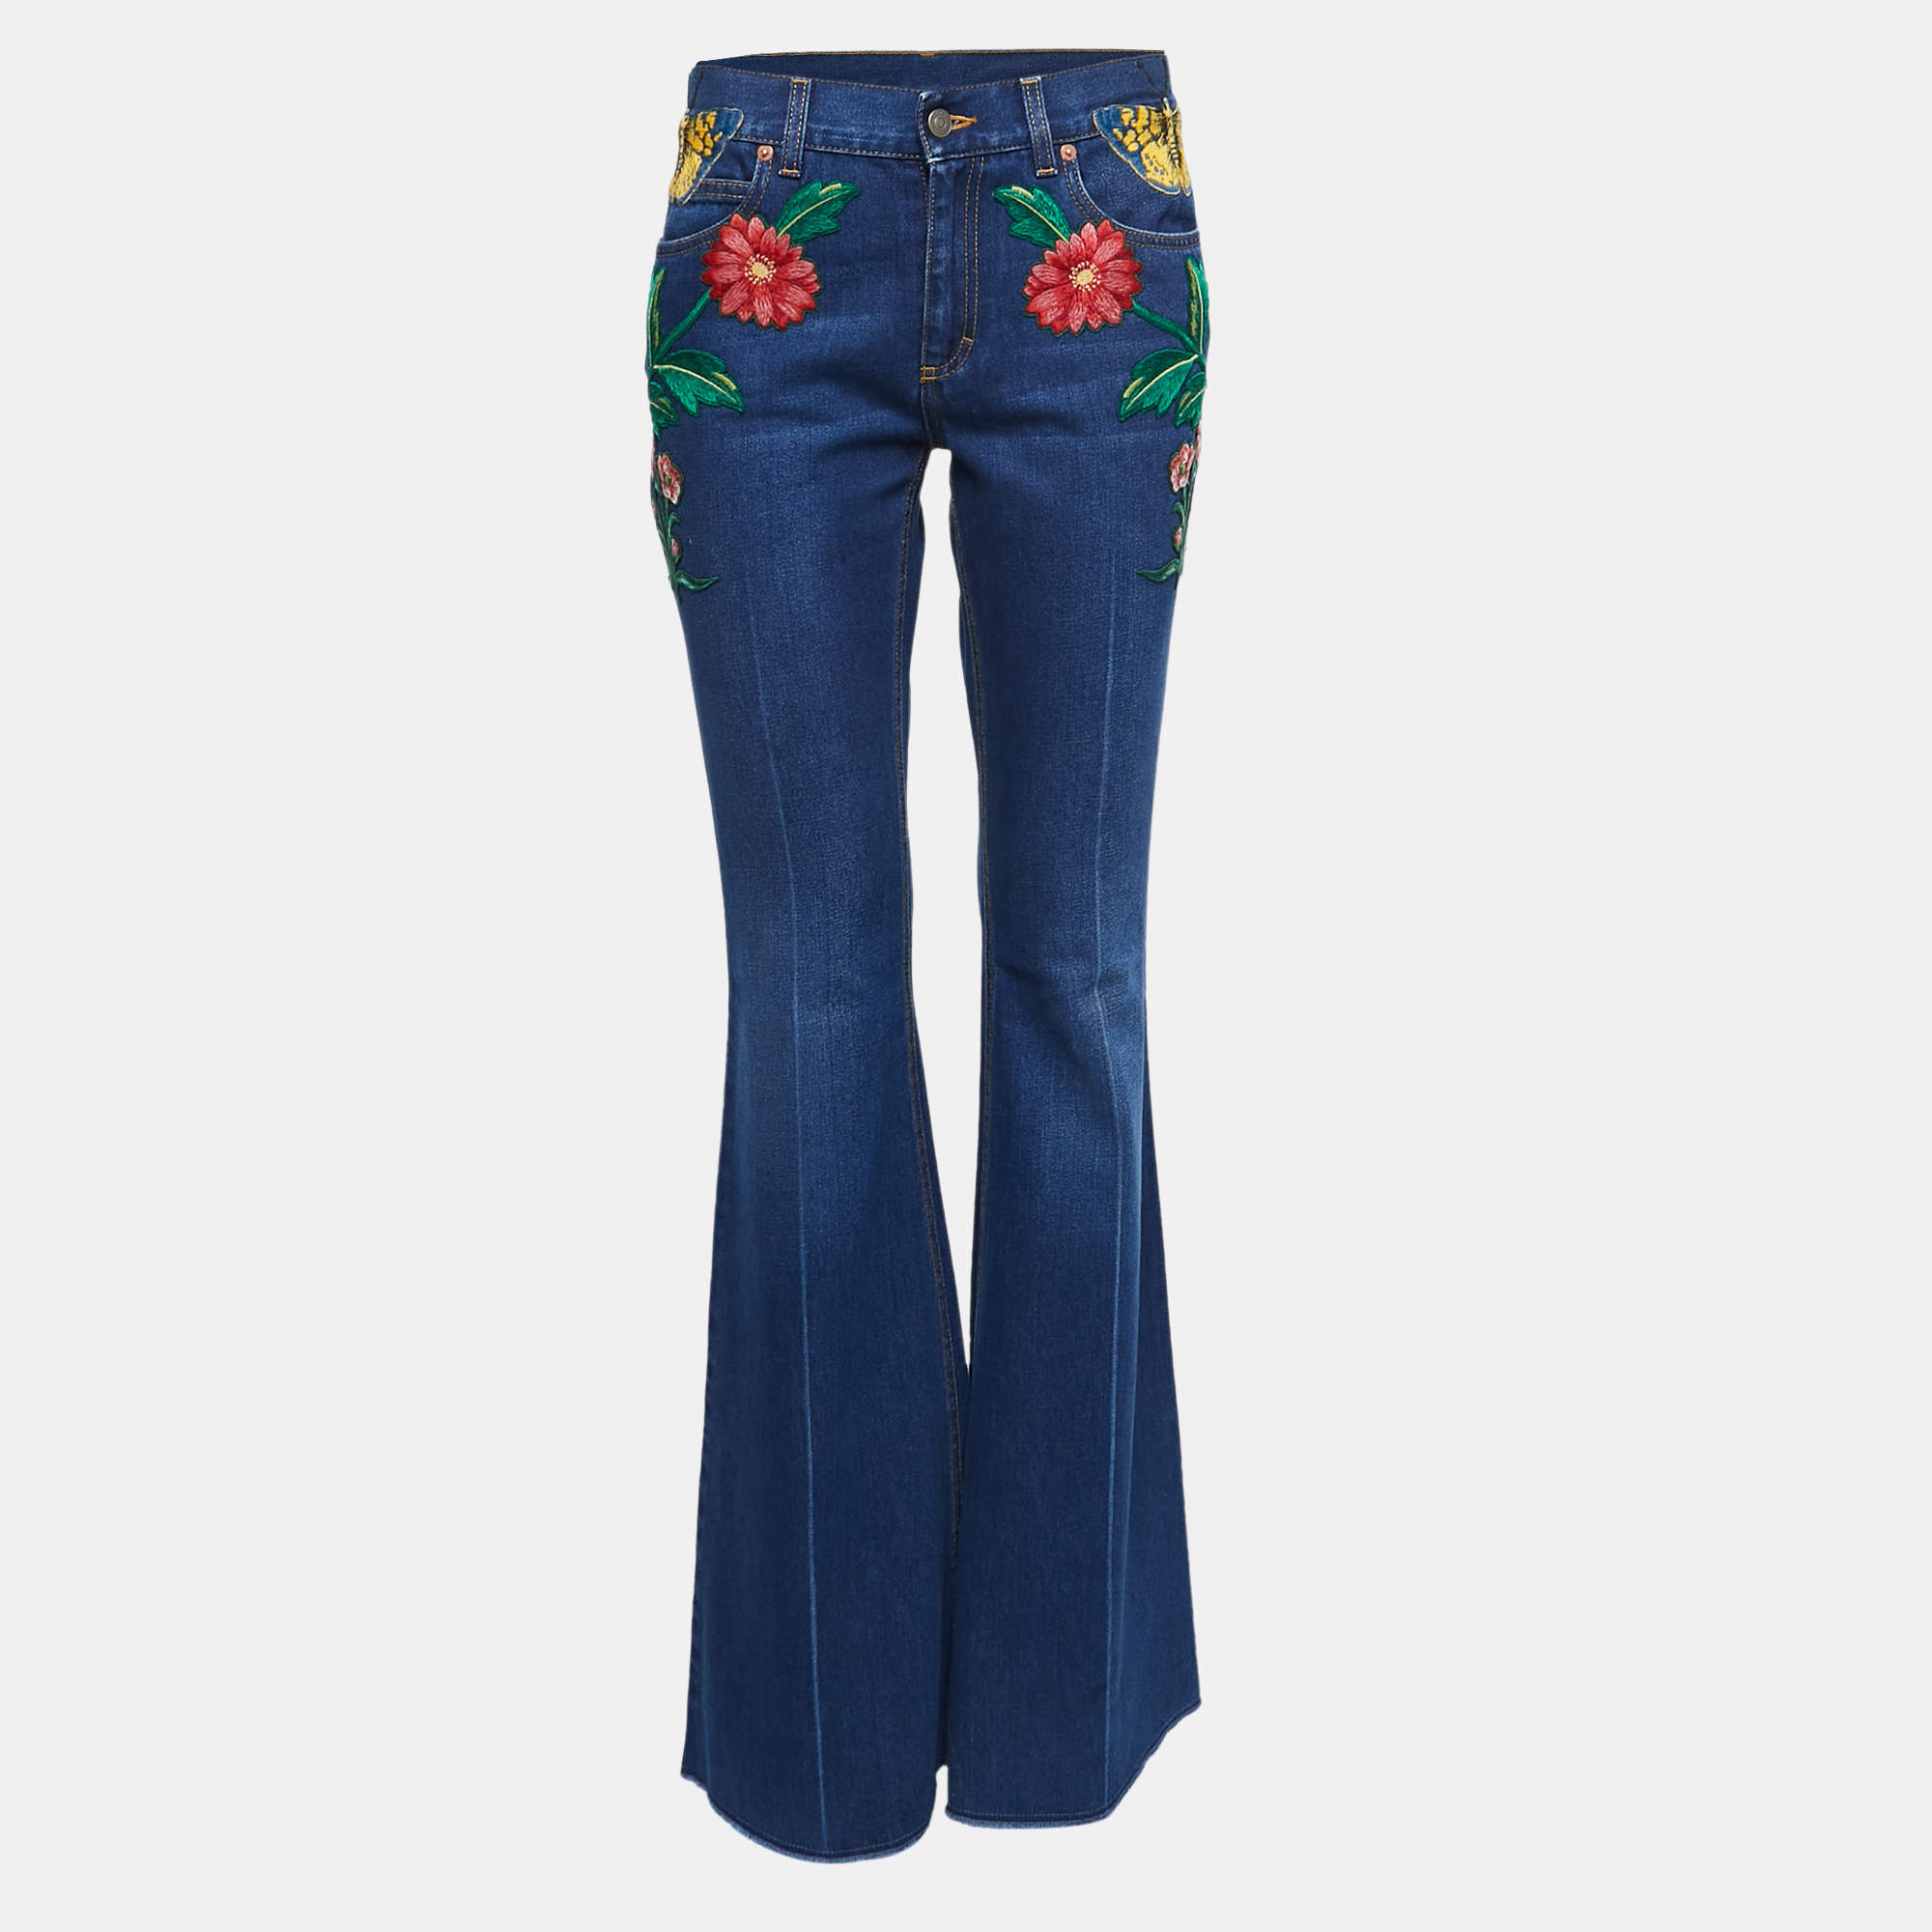 Gucci Blue Denim Floral and Butterfly Embroidered Flared Jean M